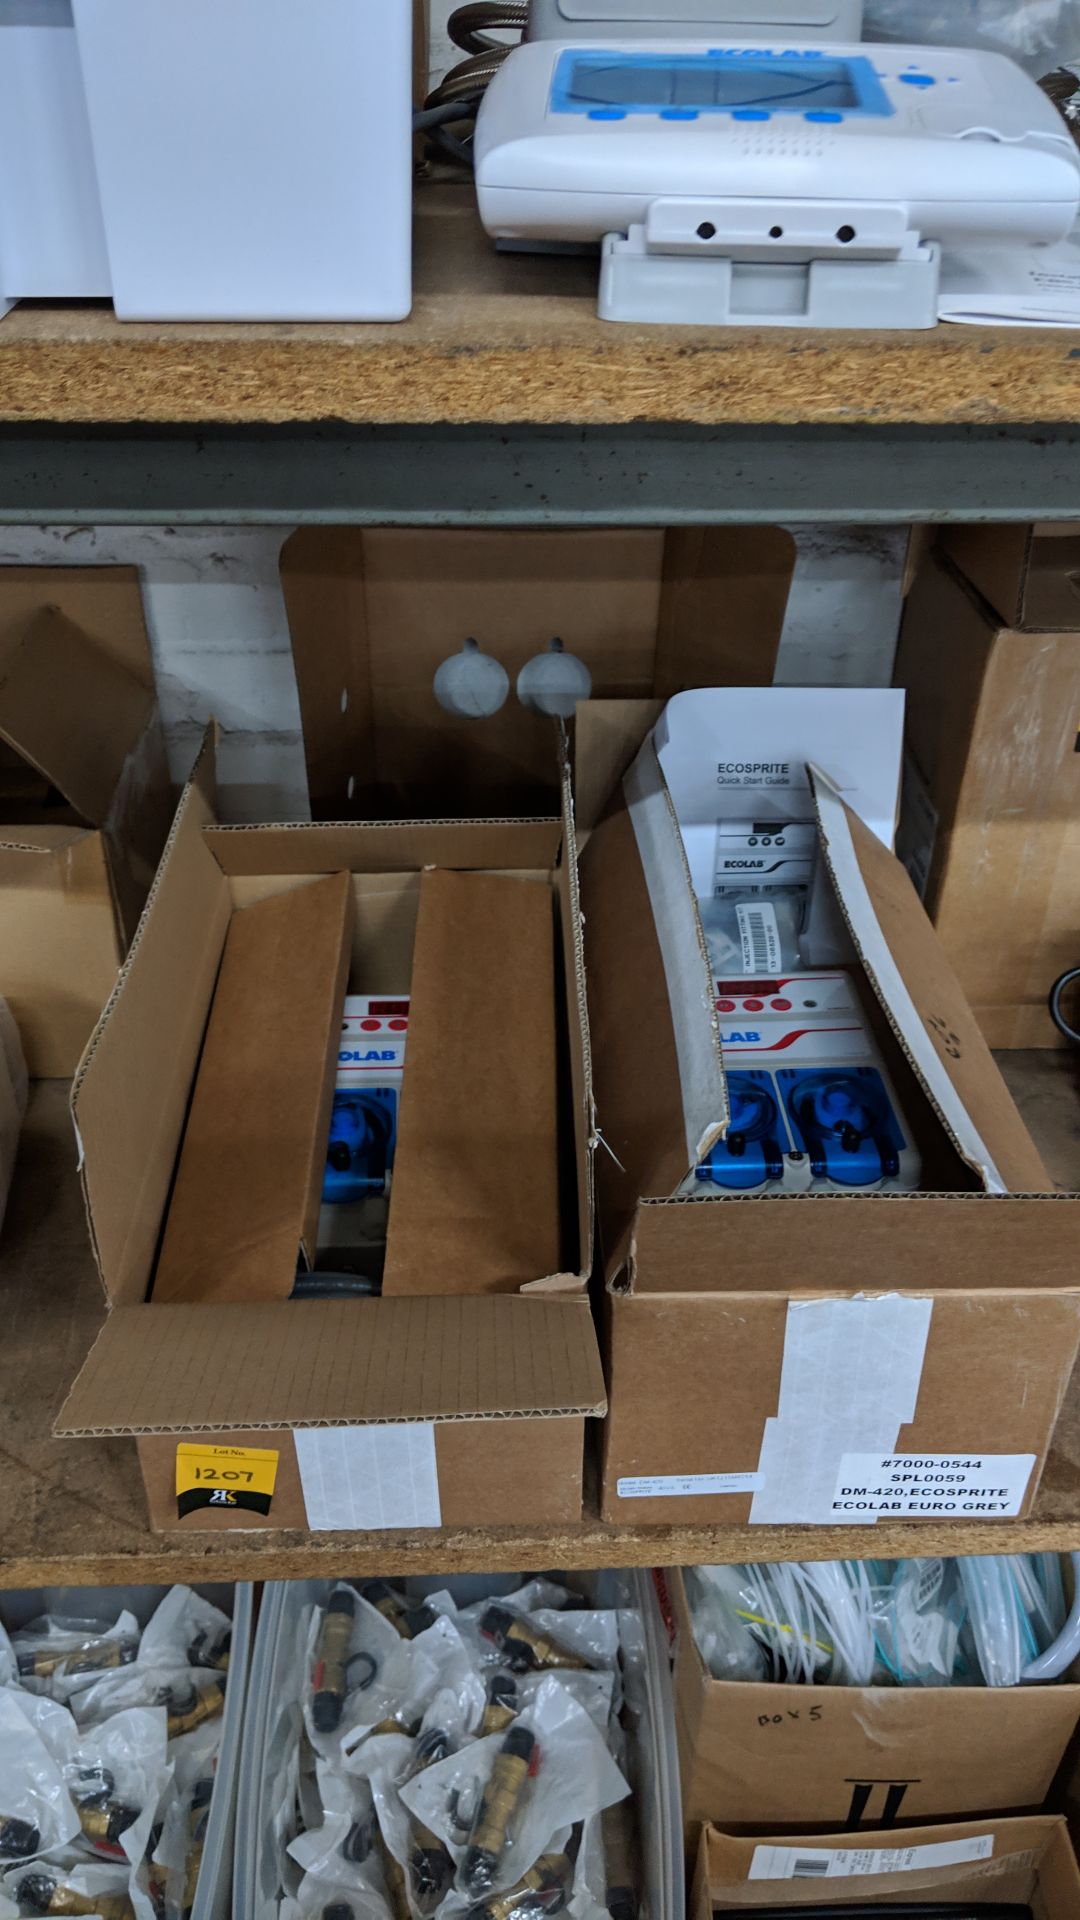 2 off Ecolab Ecosprite controller dispensers model no. DM-420-SPL0059 This lot is one of a number of - Bild 6 aus 7